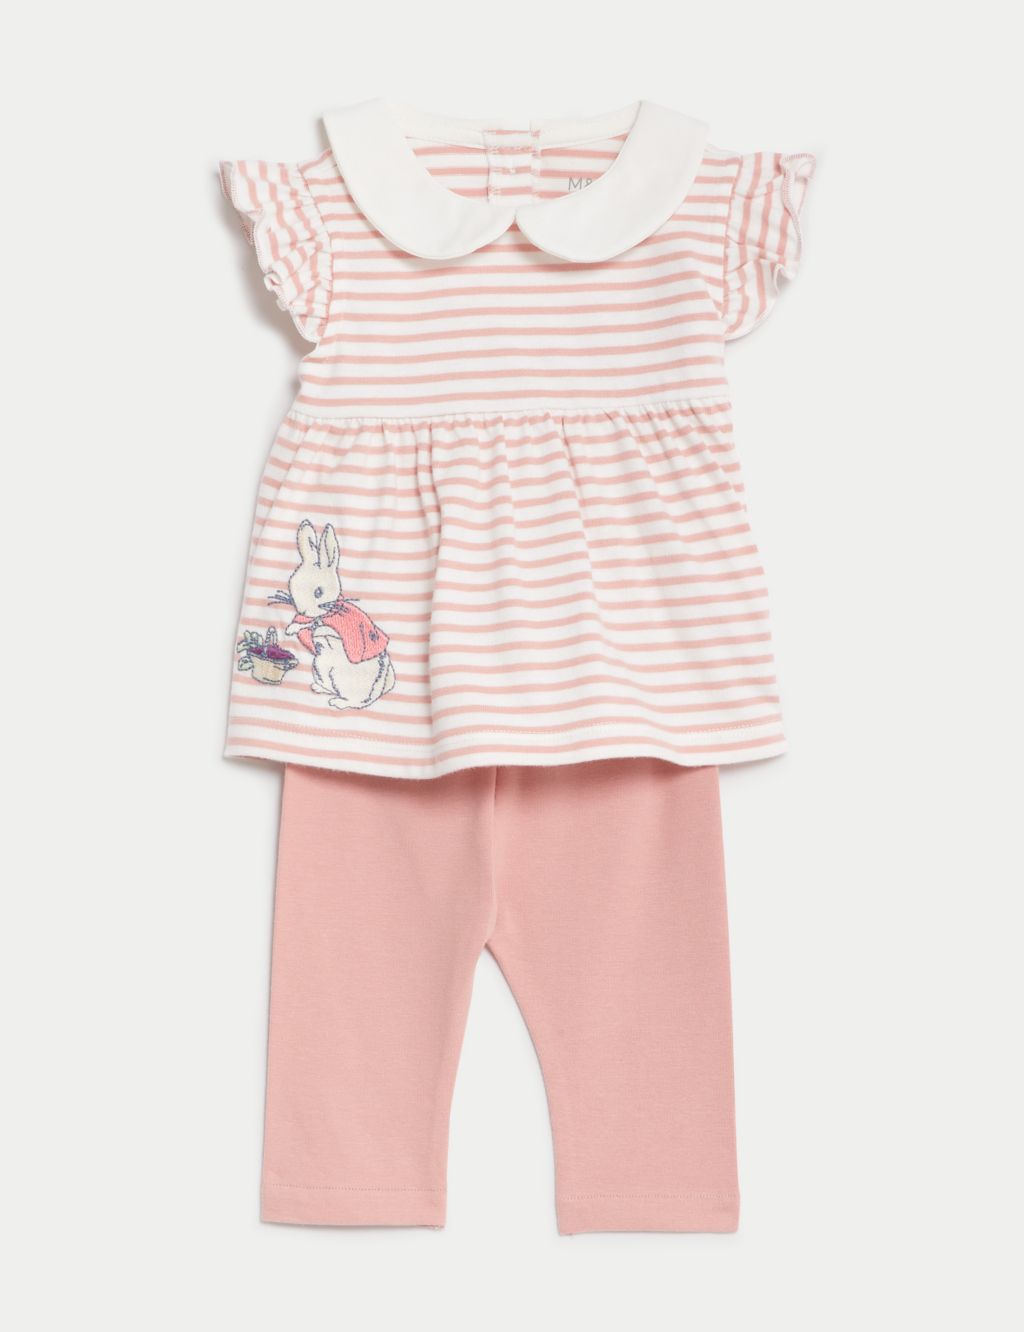 2pc Cotton Rich Peter Rabbit™ Flopsy Outfit (0-3 Yrs) image 1